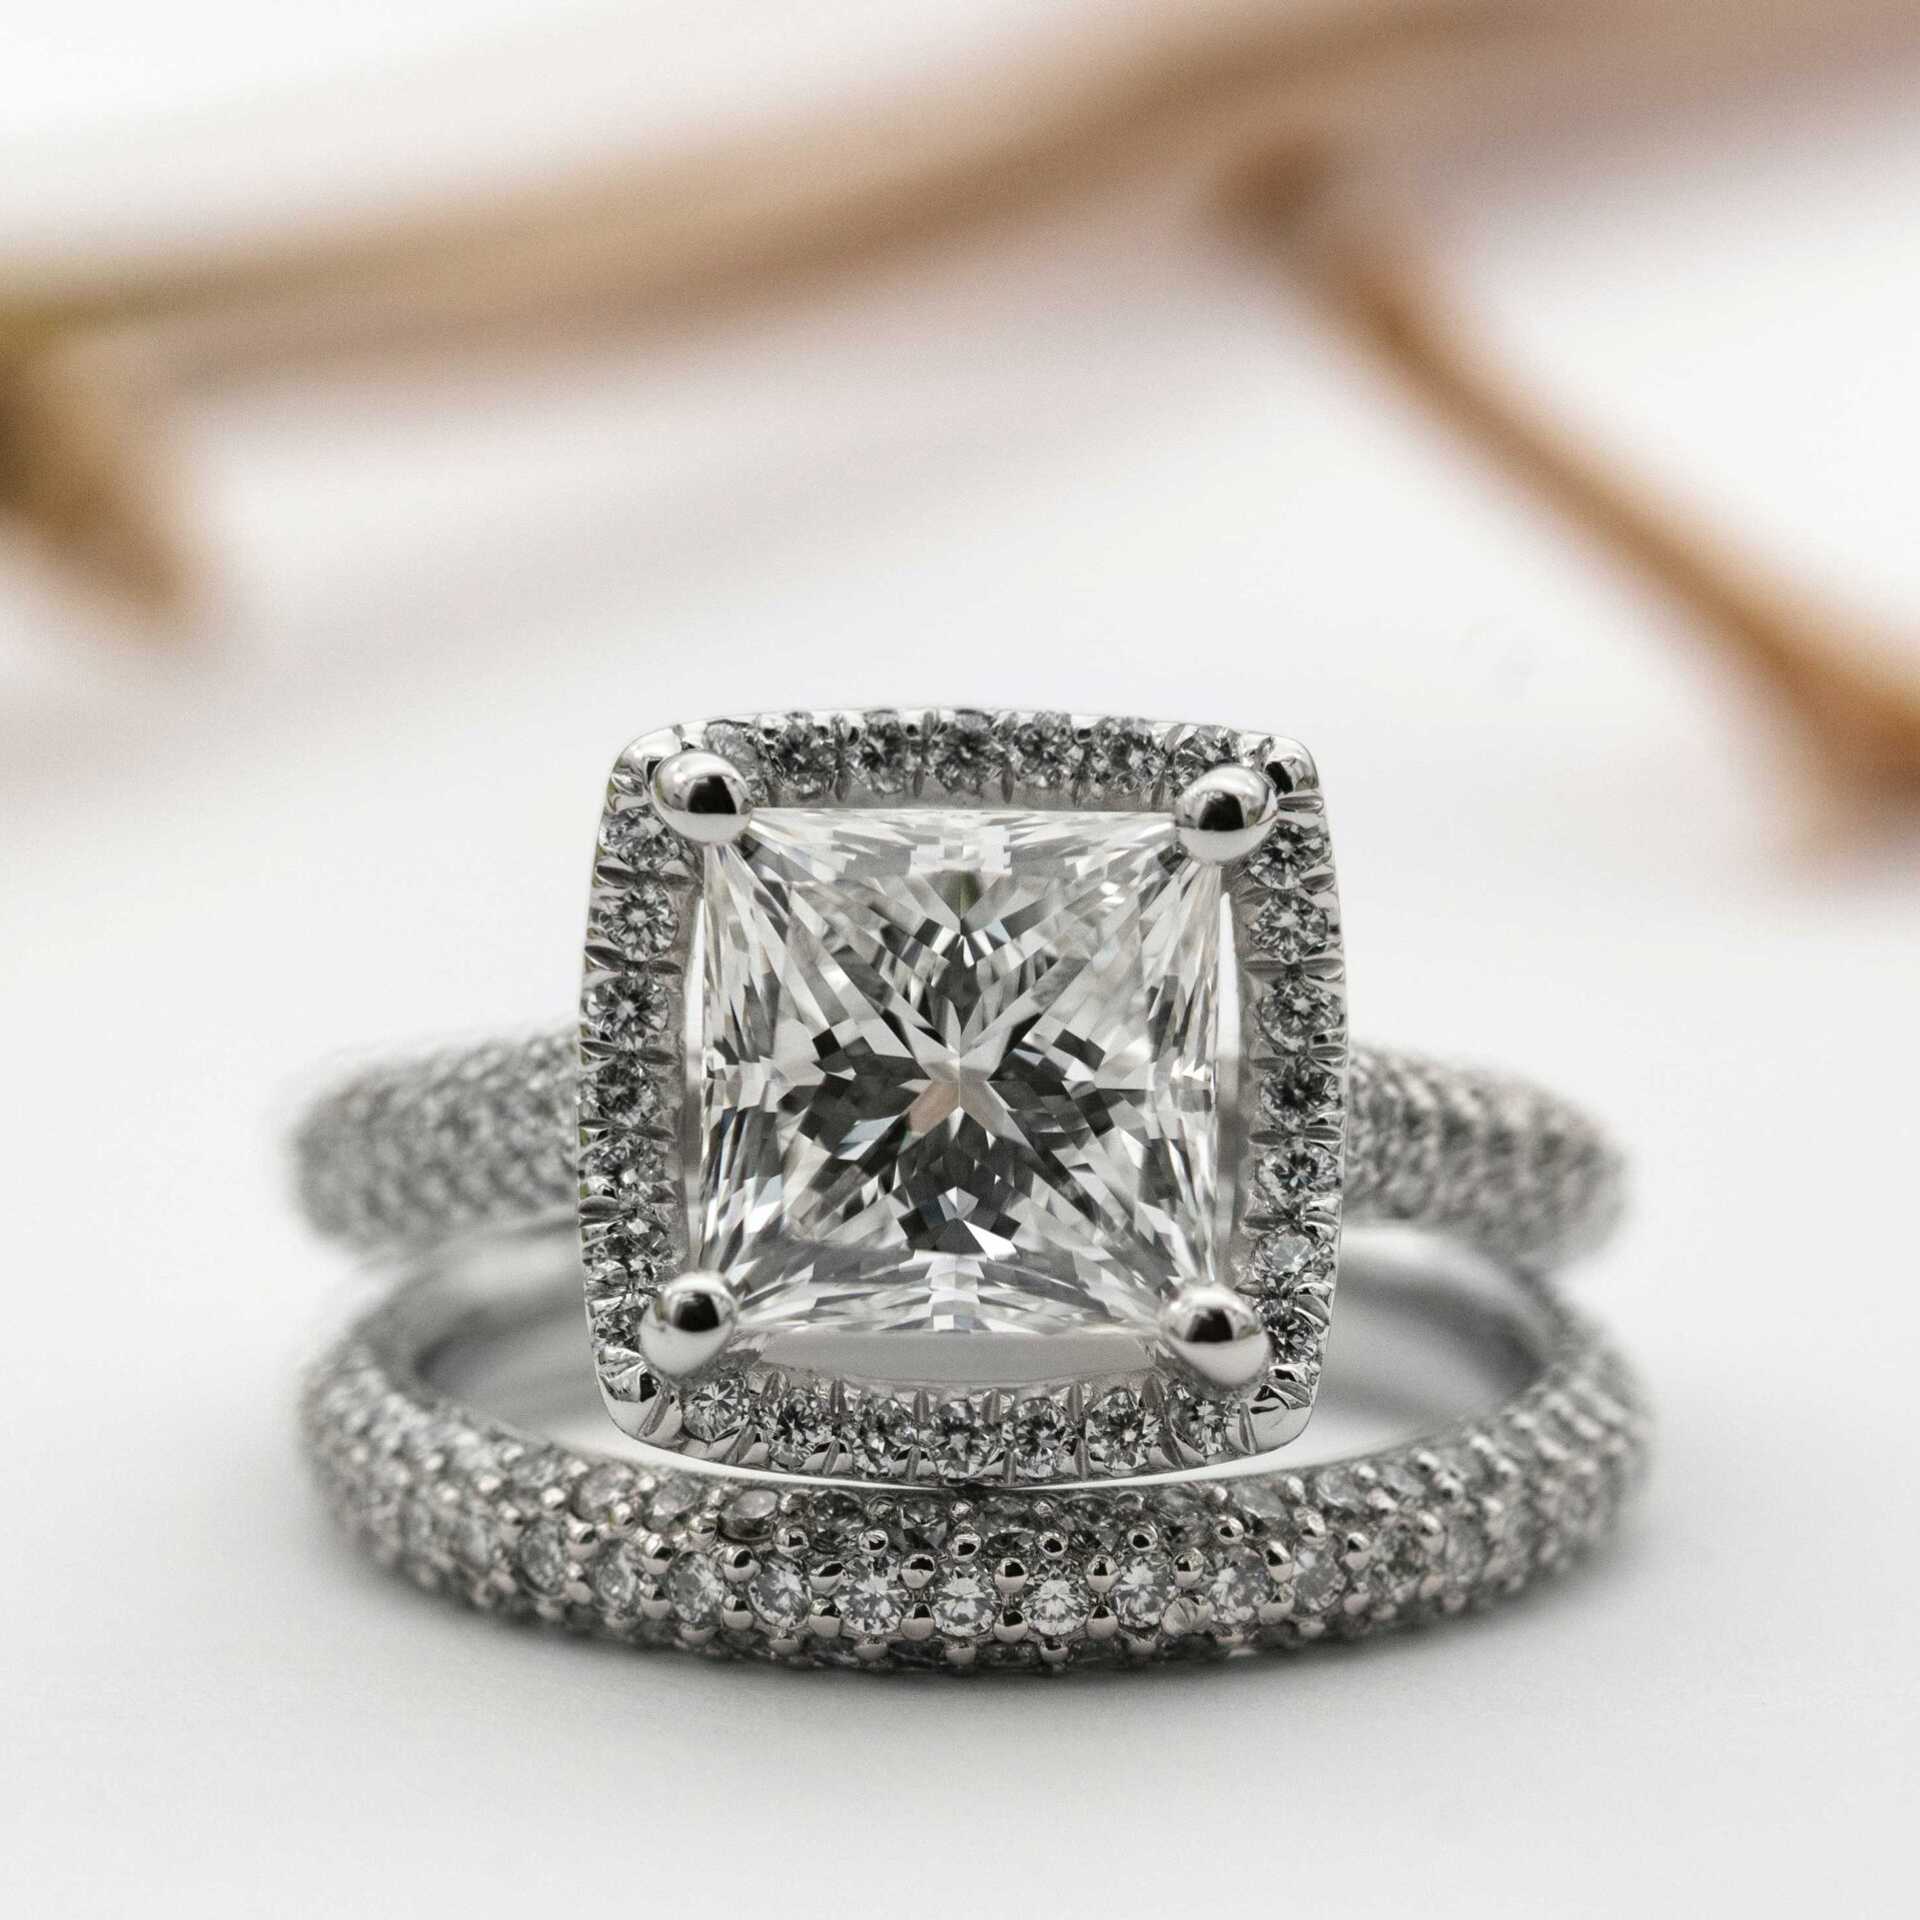 An exquisite ring with a large pillow cut diamond.